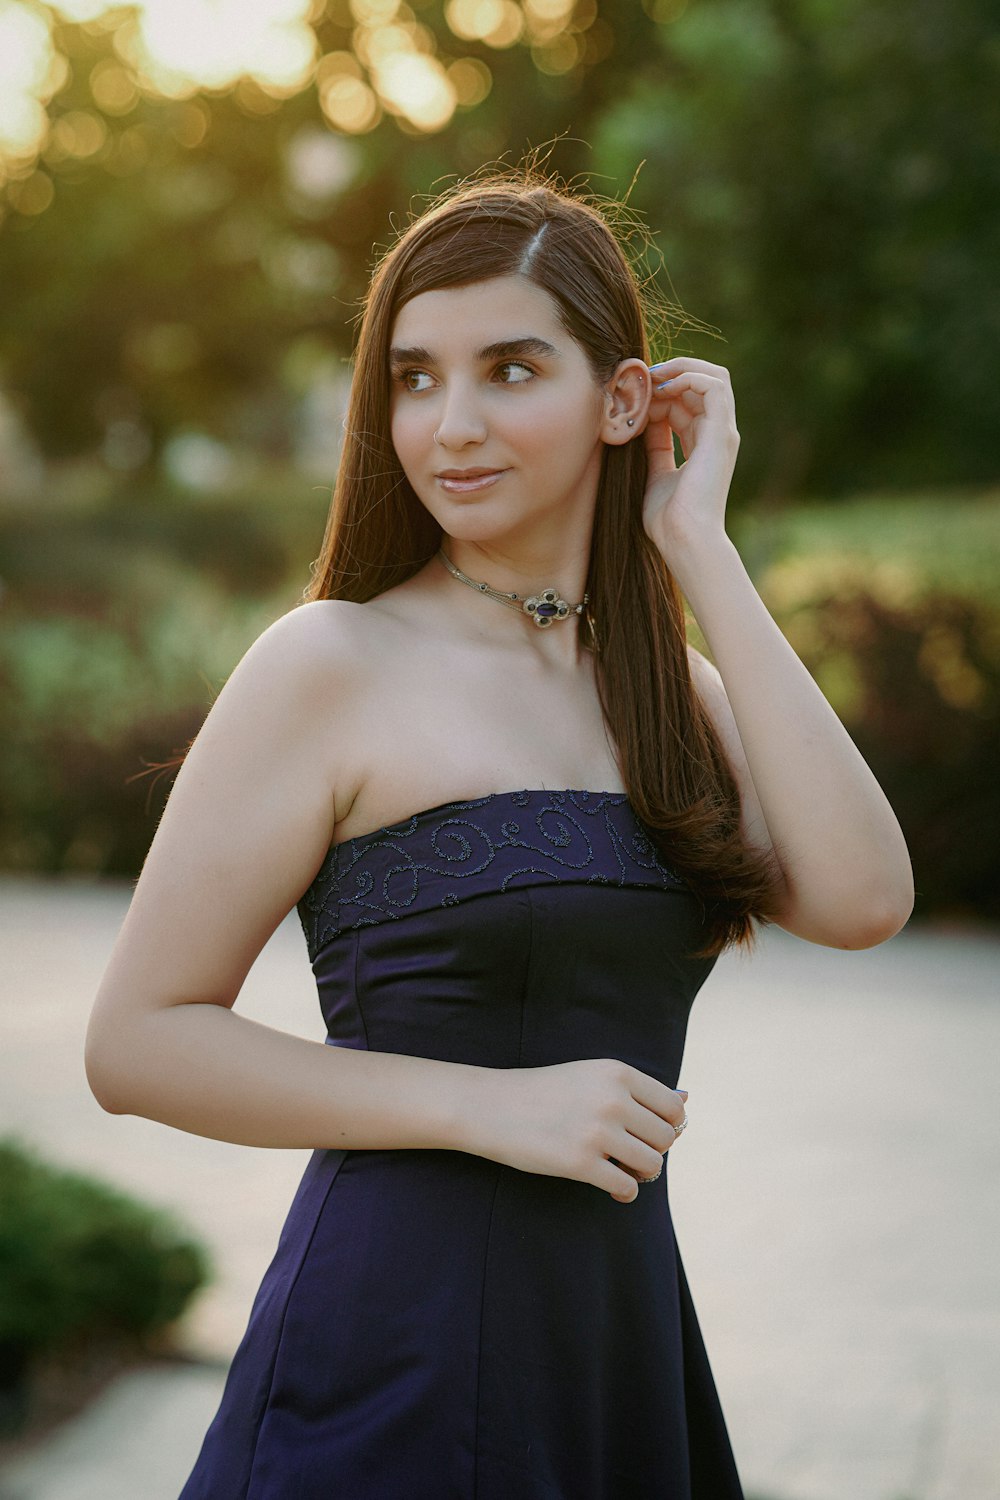 A woman in a strapless dress poses for a picture photo – Free Dress Image  on Unsplash